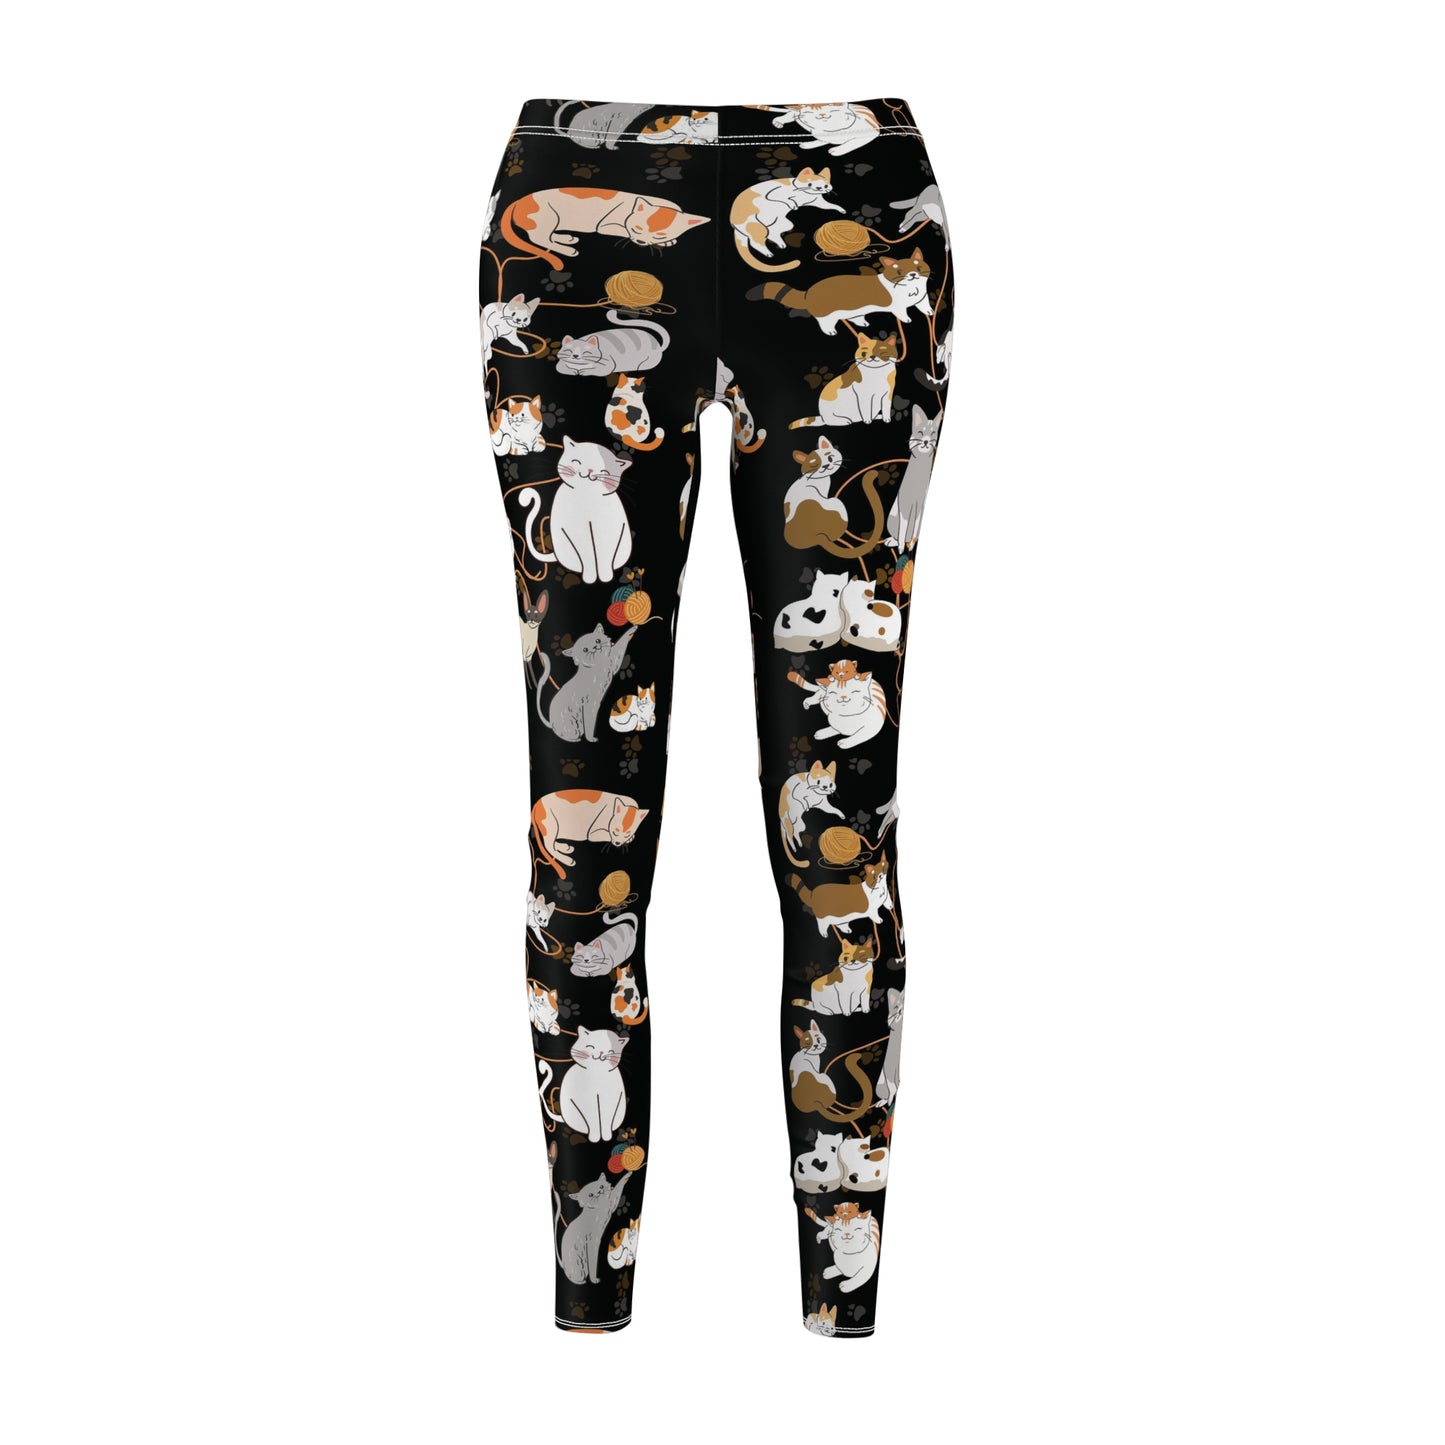 Cute cat leggings Pilates yoga pants athletic clothing gym pants work out clothing stretchy pants cat fashion crazy cat lady apparel